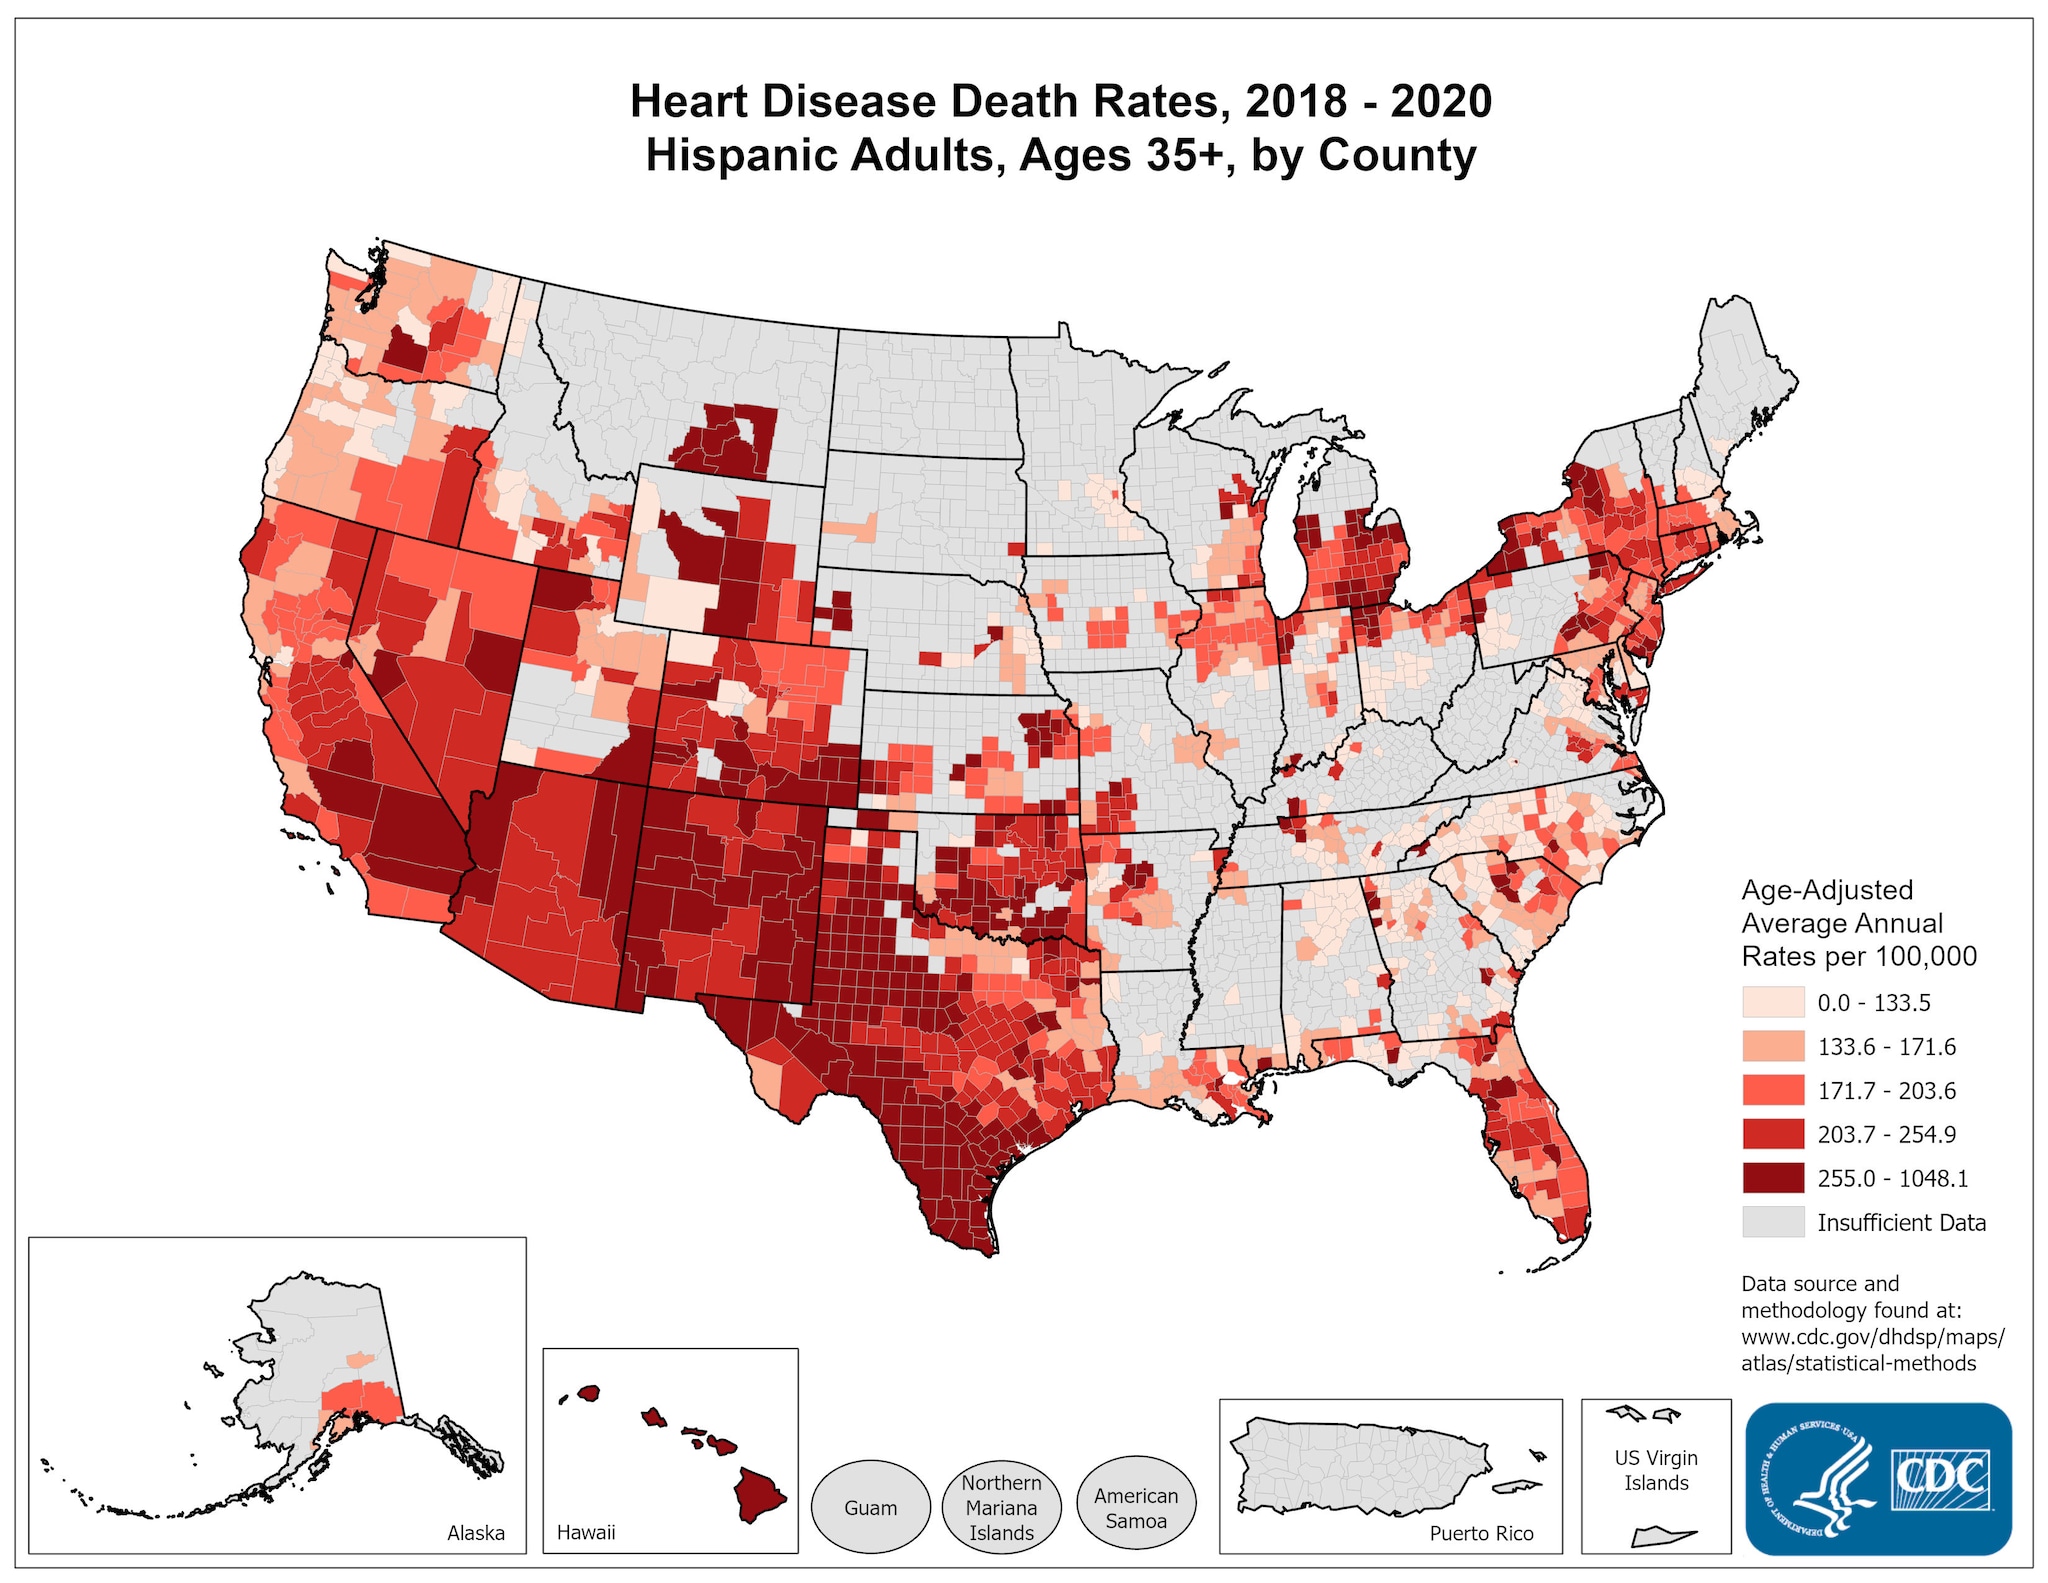 Heart Disease Death Rates for 2018 through 2020 for Hispanics Aged 35 Years and Older by County